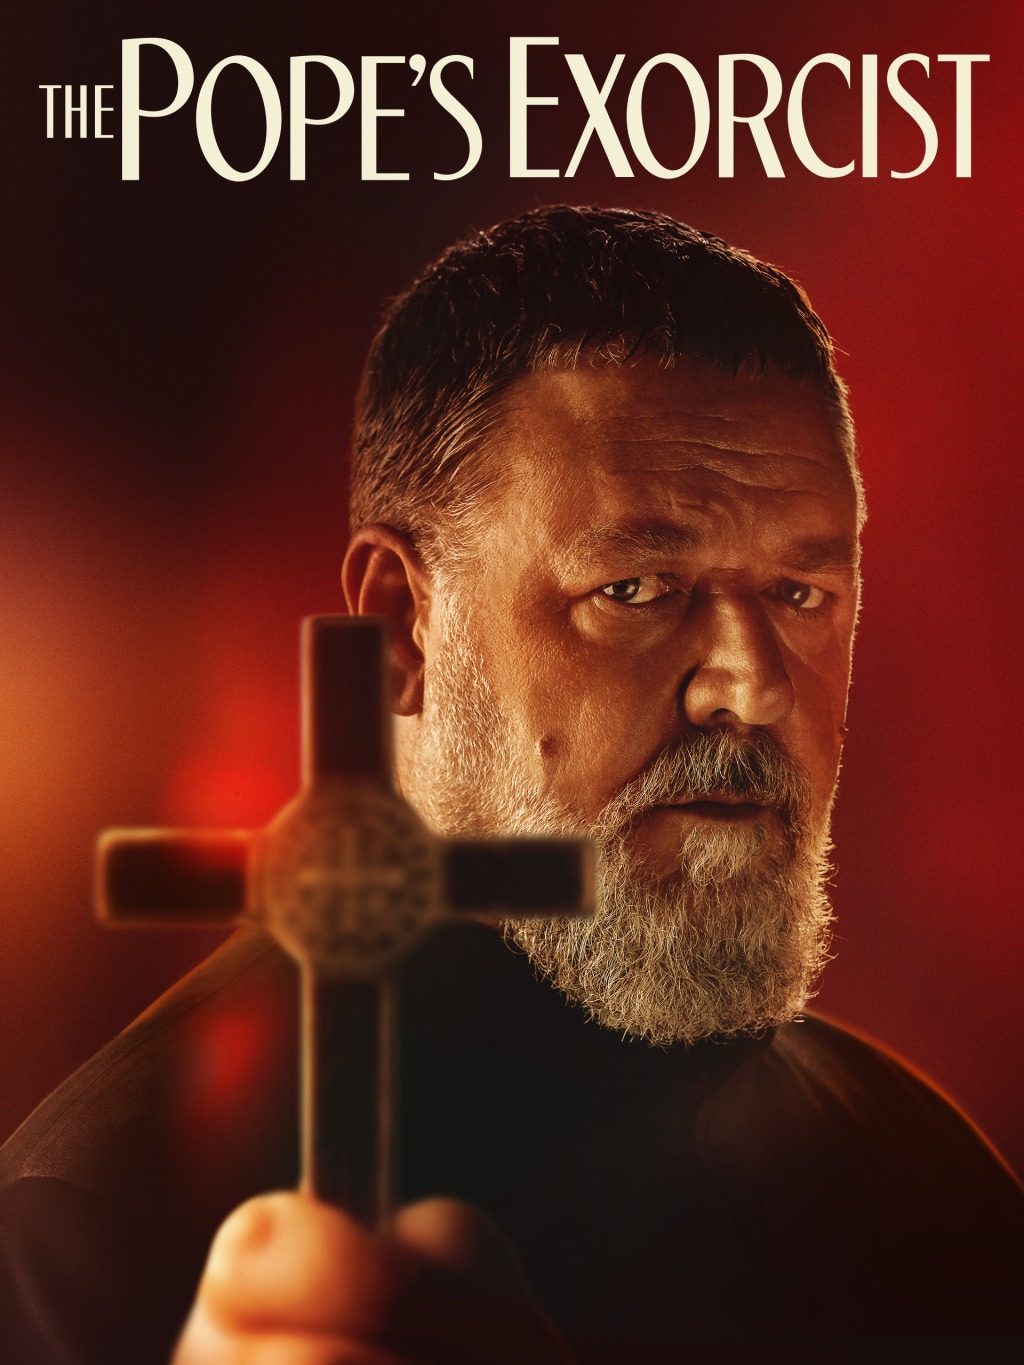 The Pope’s Exorcist Review: Russell Crowe’s ‘Gladiator’ persona is the only saving grace